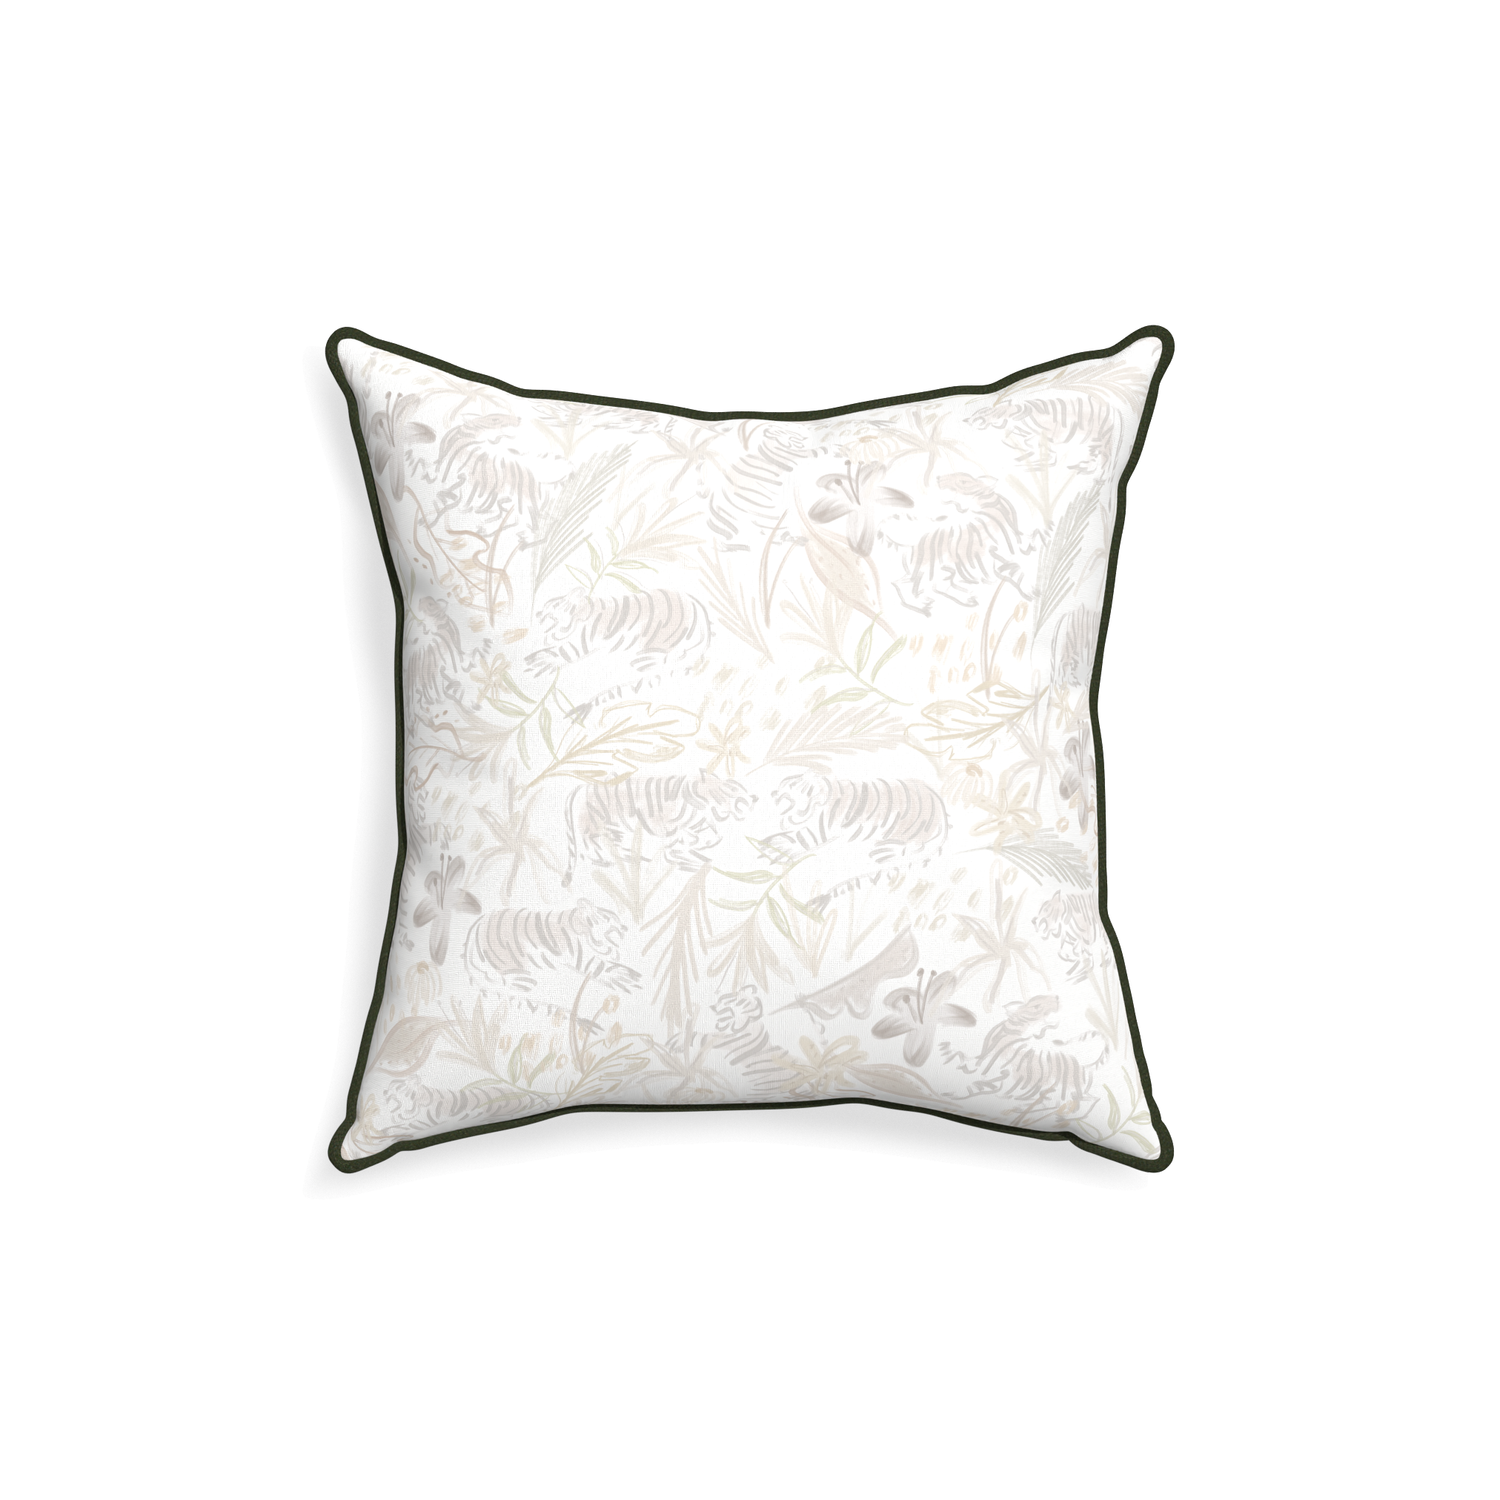 18-square frida sand custom beige chinoiserie tigerpillow with f piping on white background